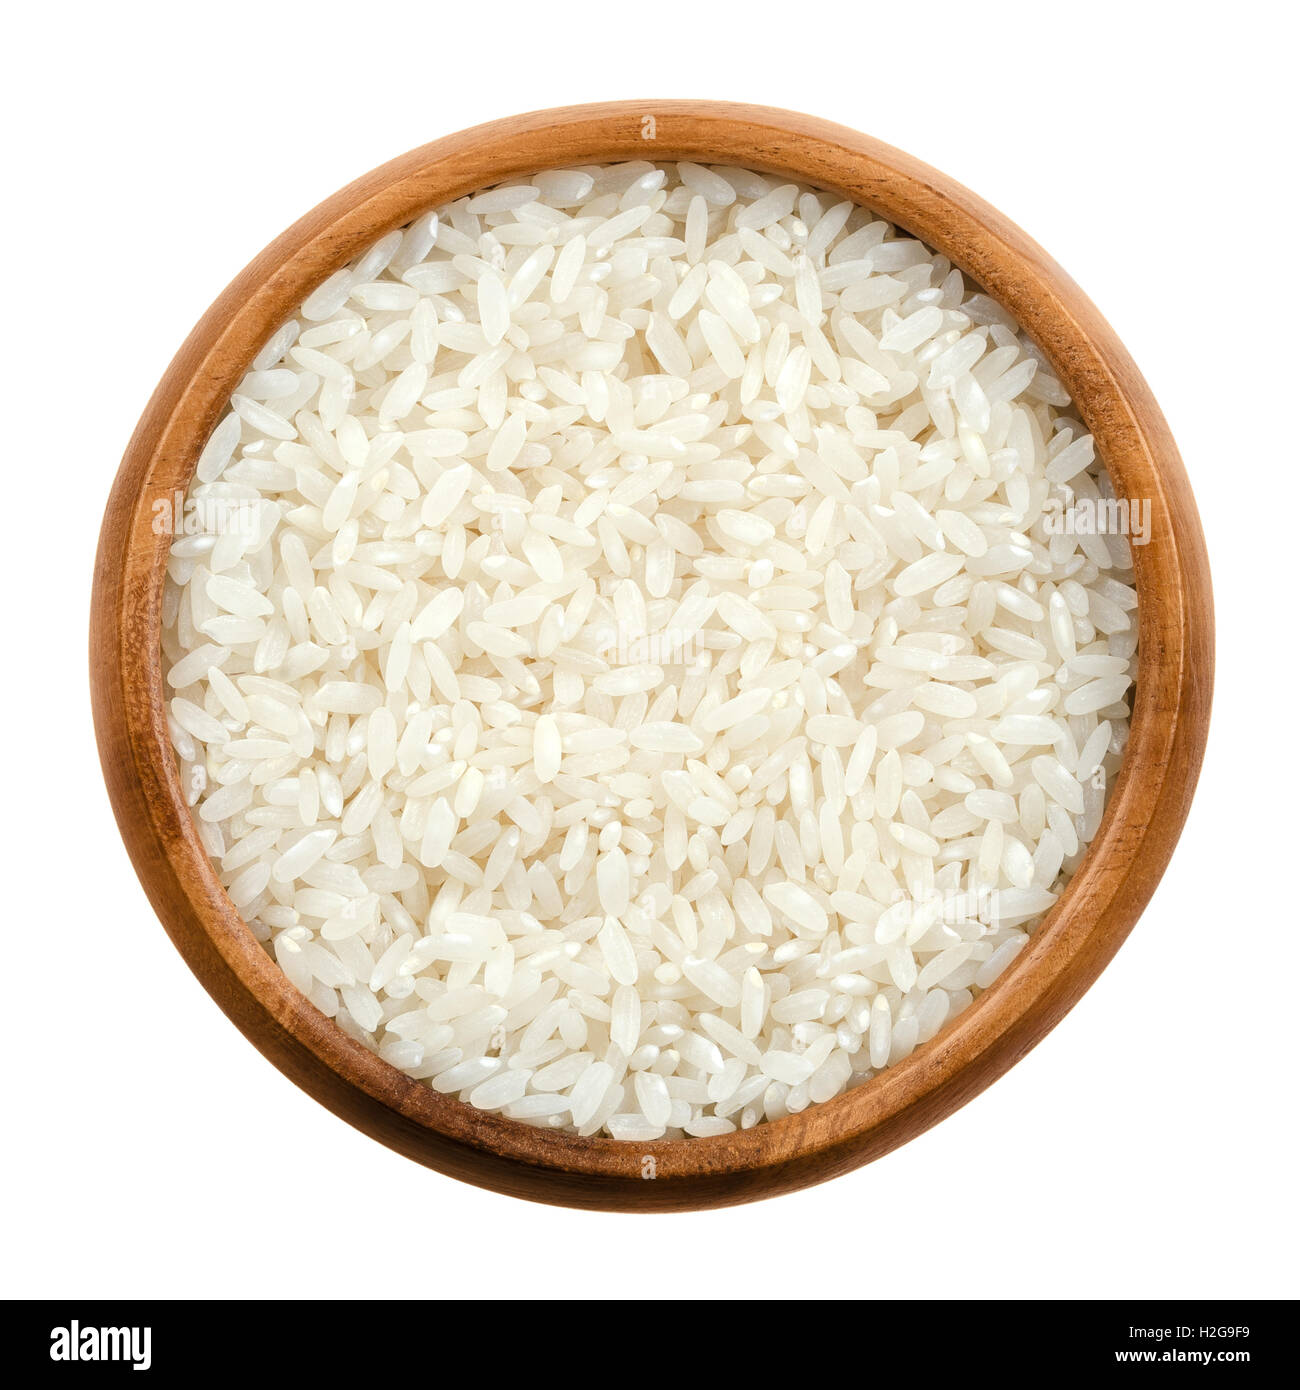 Sushi rice in a wooden bowl on white background. White short-grain Japanese rice, the seeds of the grass Oryza sativa. Stock Photo